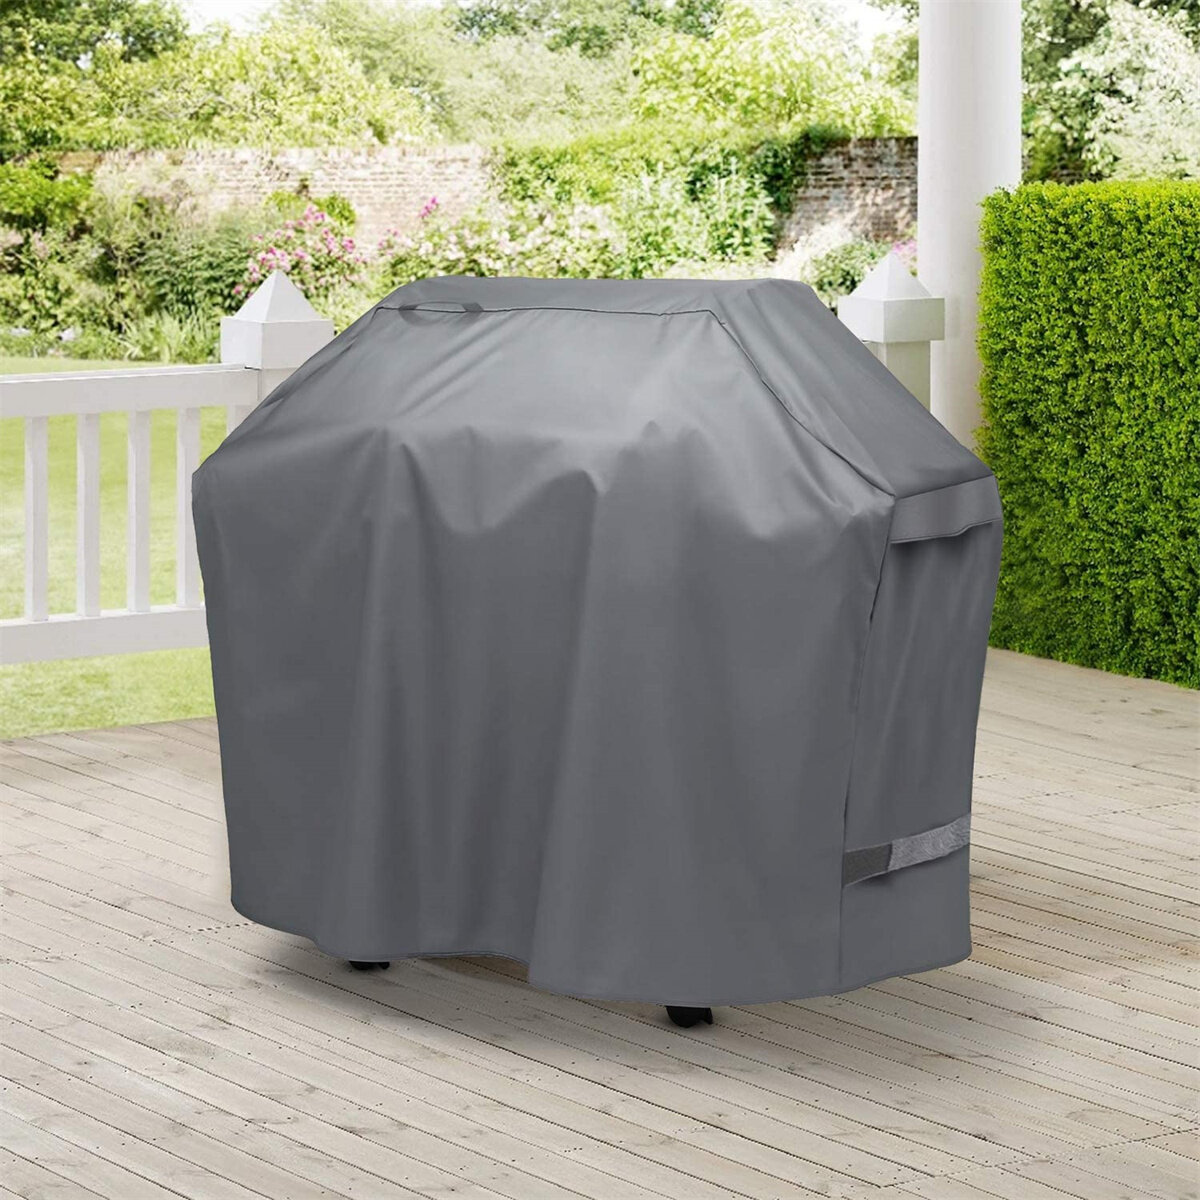 Heavy Duty 100% Waterproof BBQ Gas Grill Cover for Char-Broil 3,4 & 5 Burner